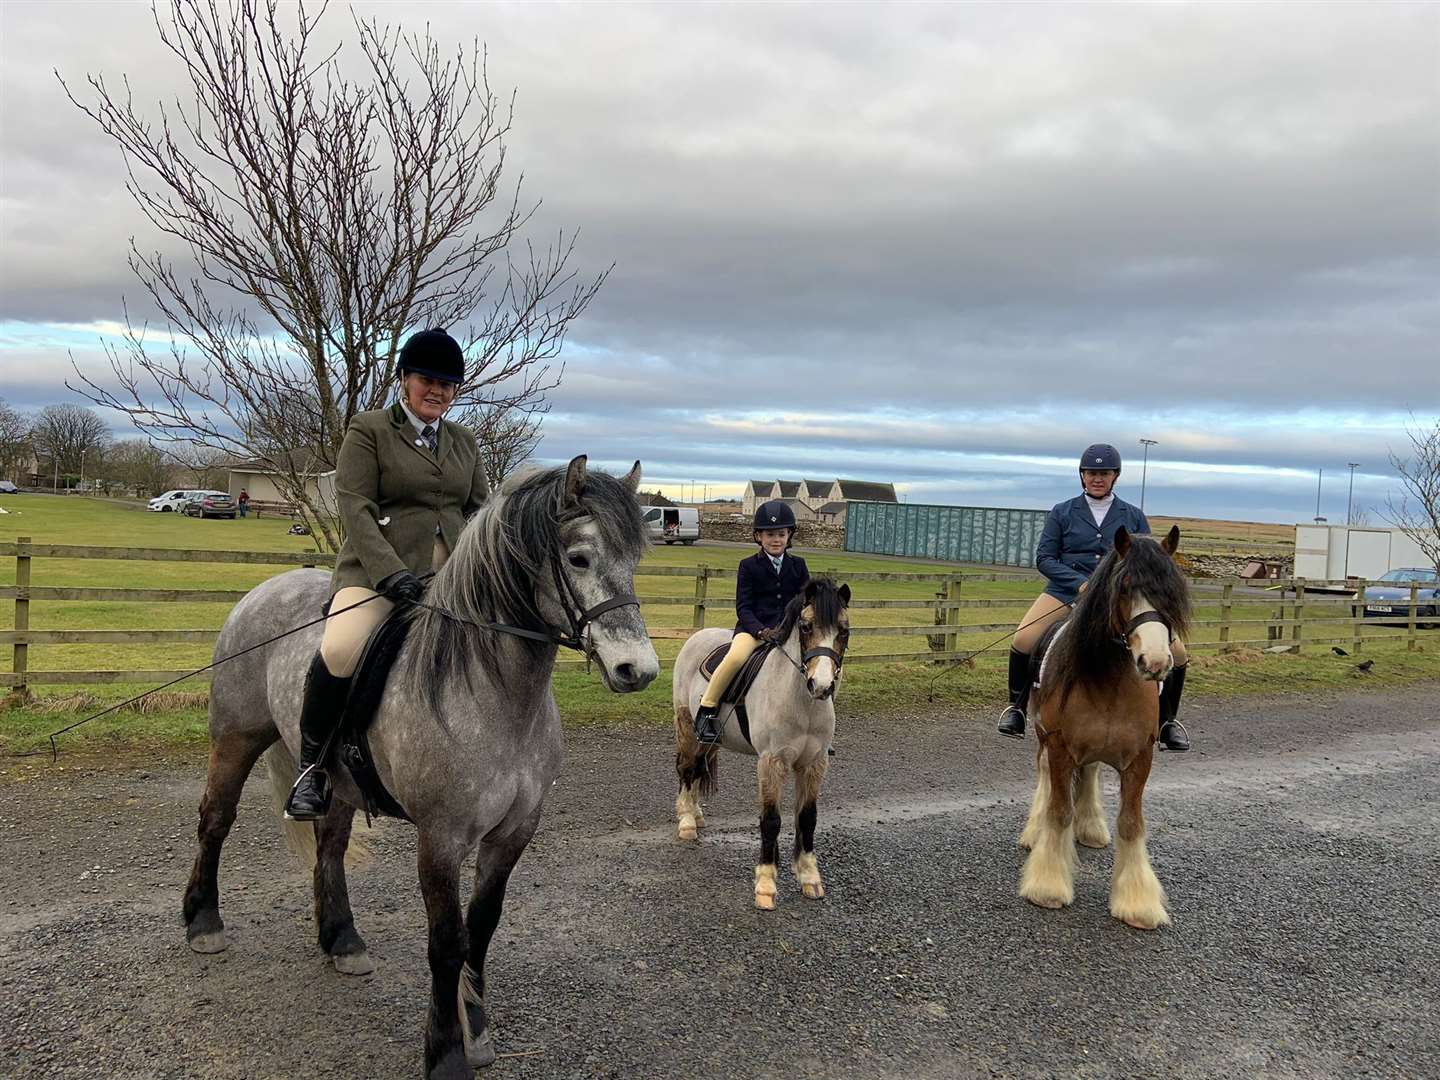 Some of the riders who took part in the intro tests. From left to right: Jacky MacMillan with Robyn, Rachel MacGregor riding Dandy, and Nicola Manson on Fox.